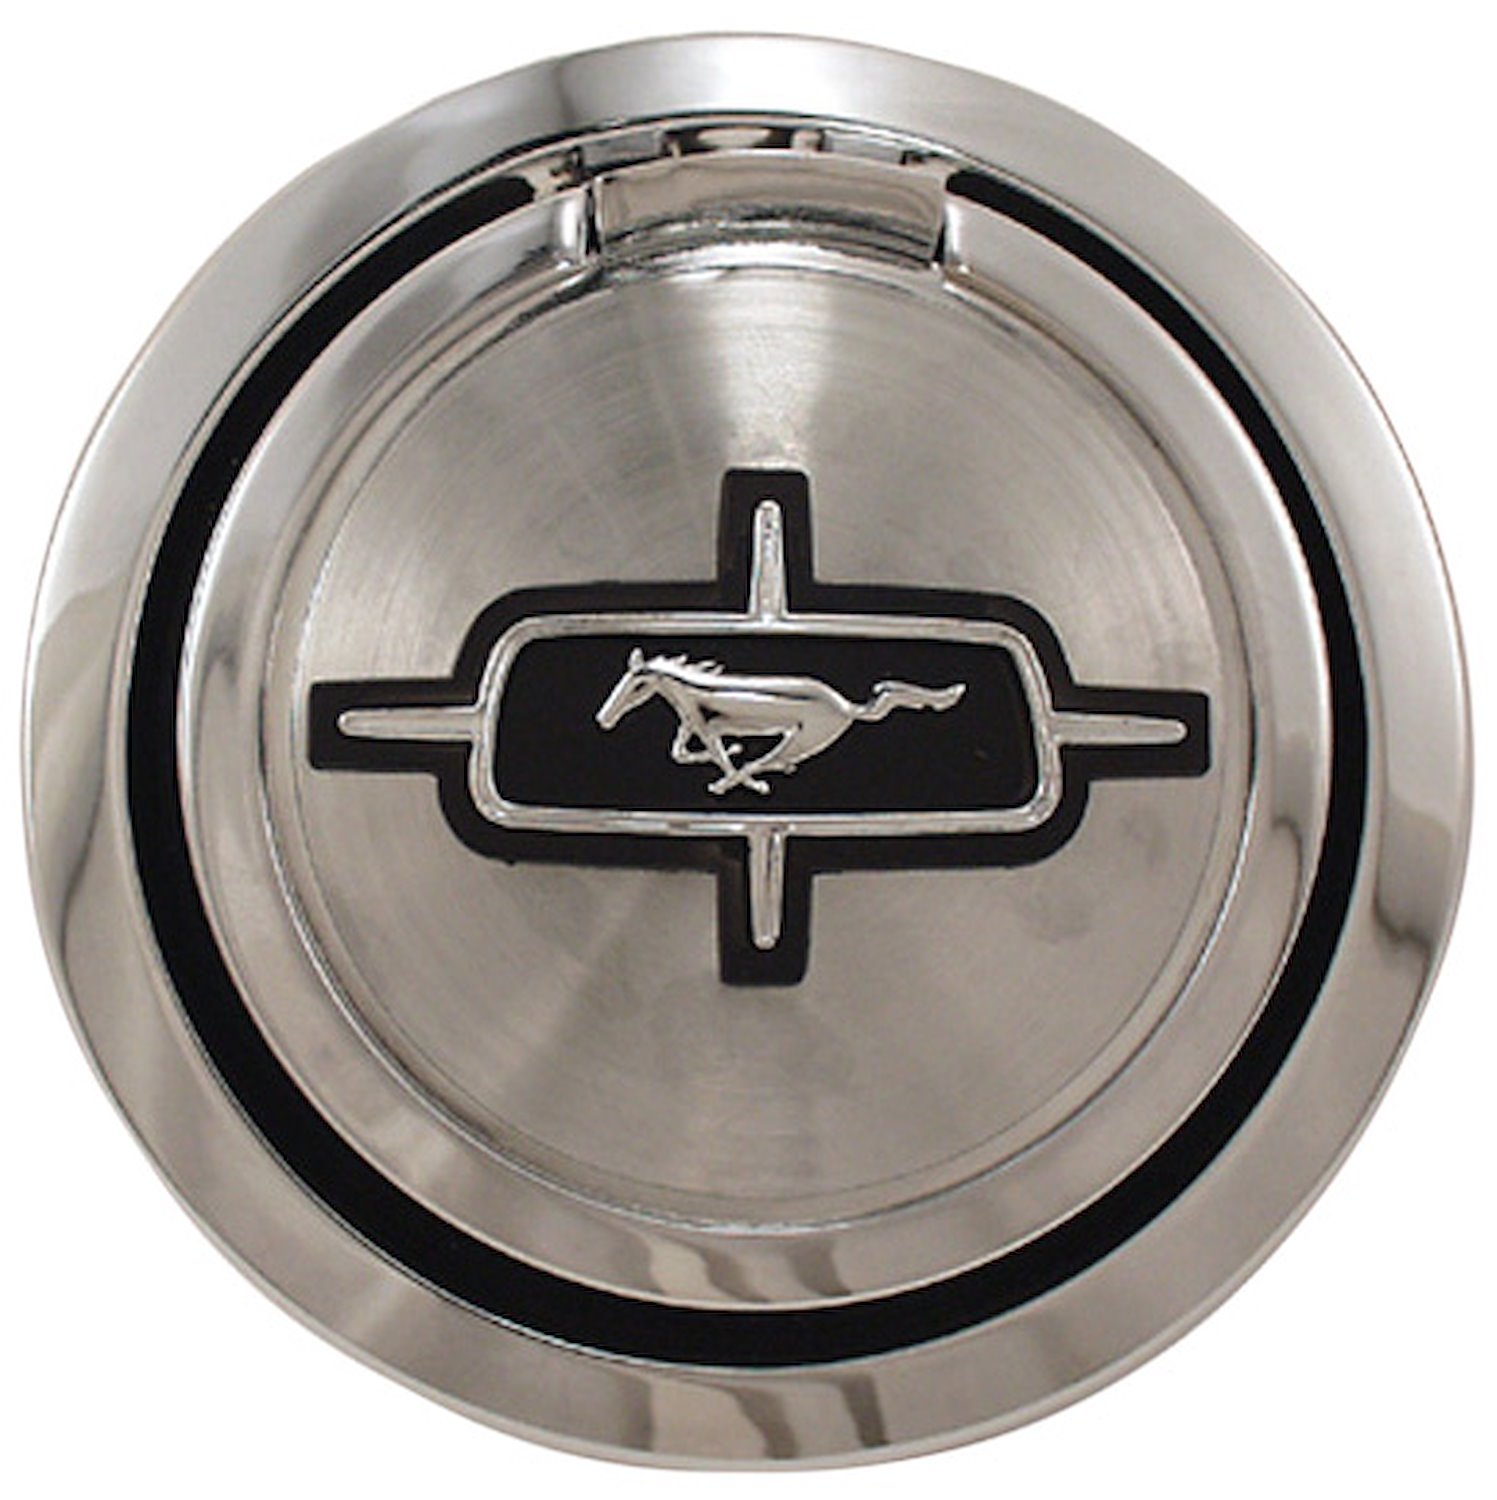 Fuel Cap 1968 Ford Mustang